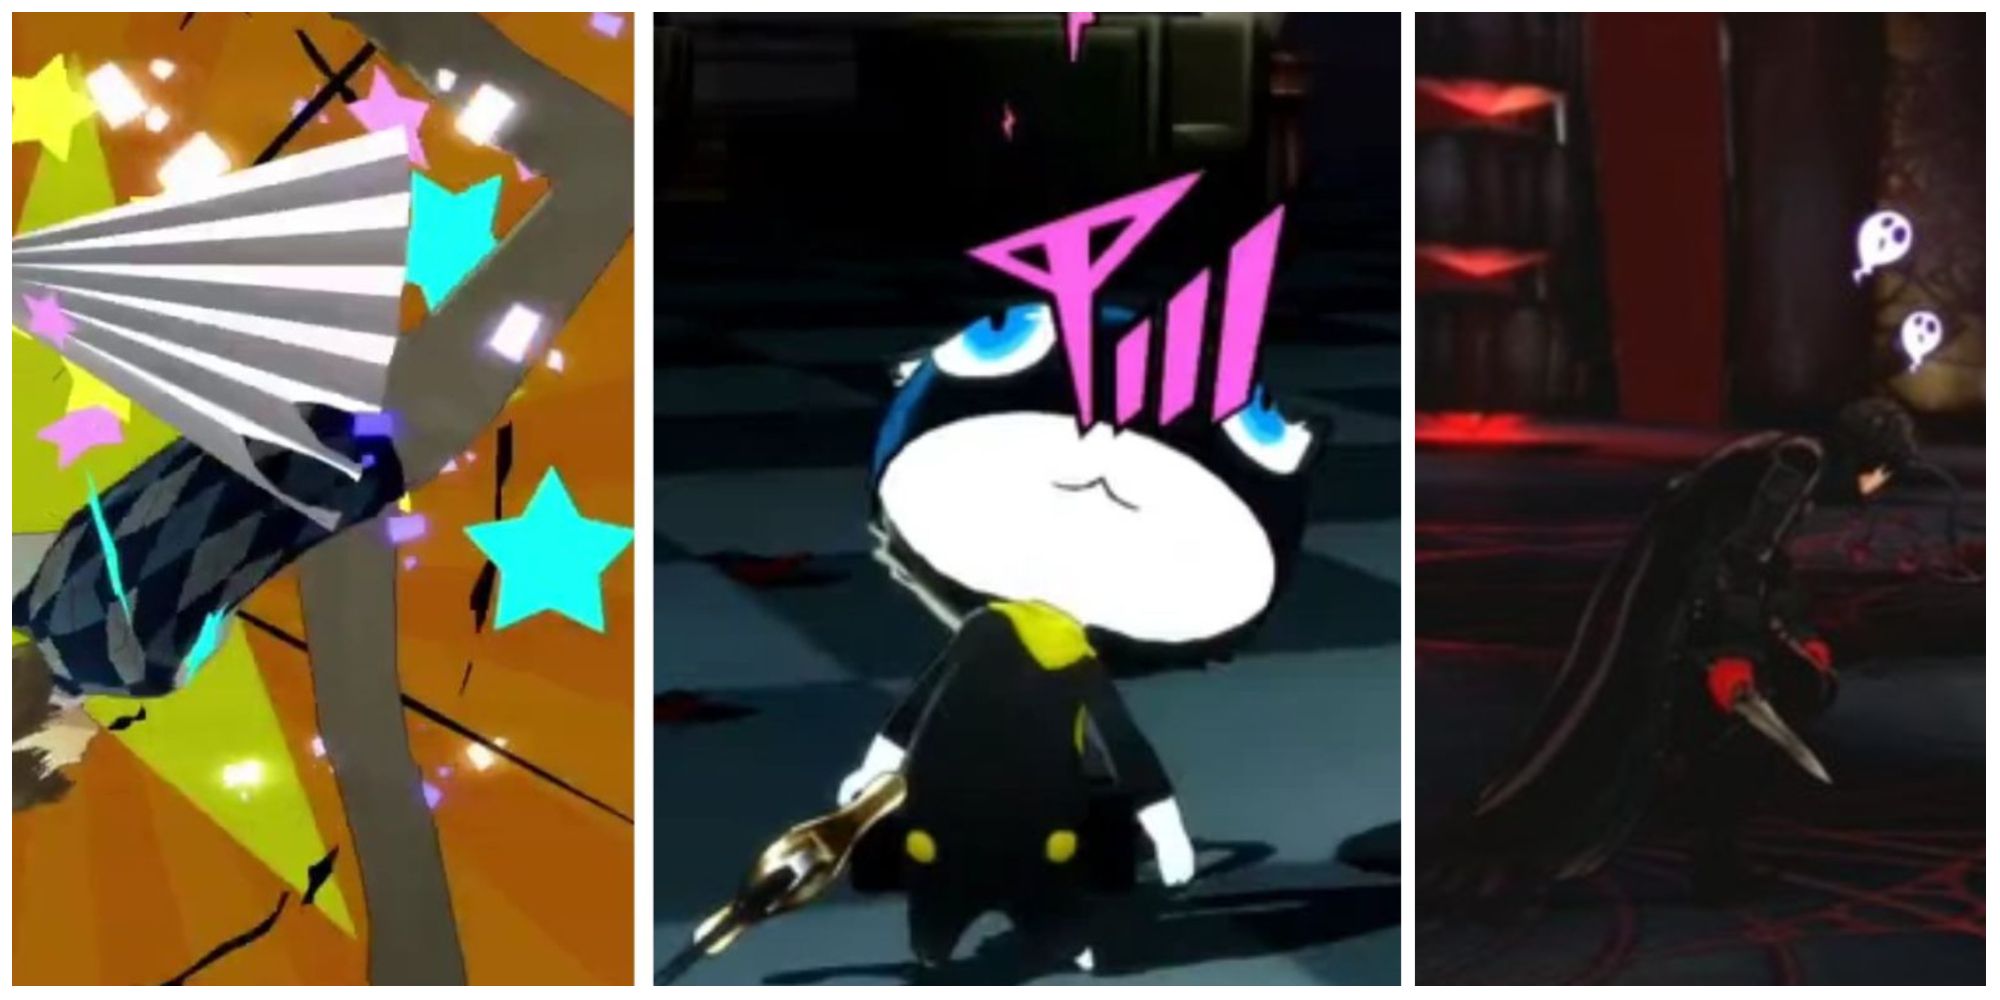 Akechi, Morgana, and Joker are all afflicted with Status Effects in Persona 5 Royal P5R